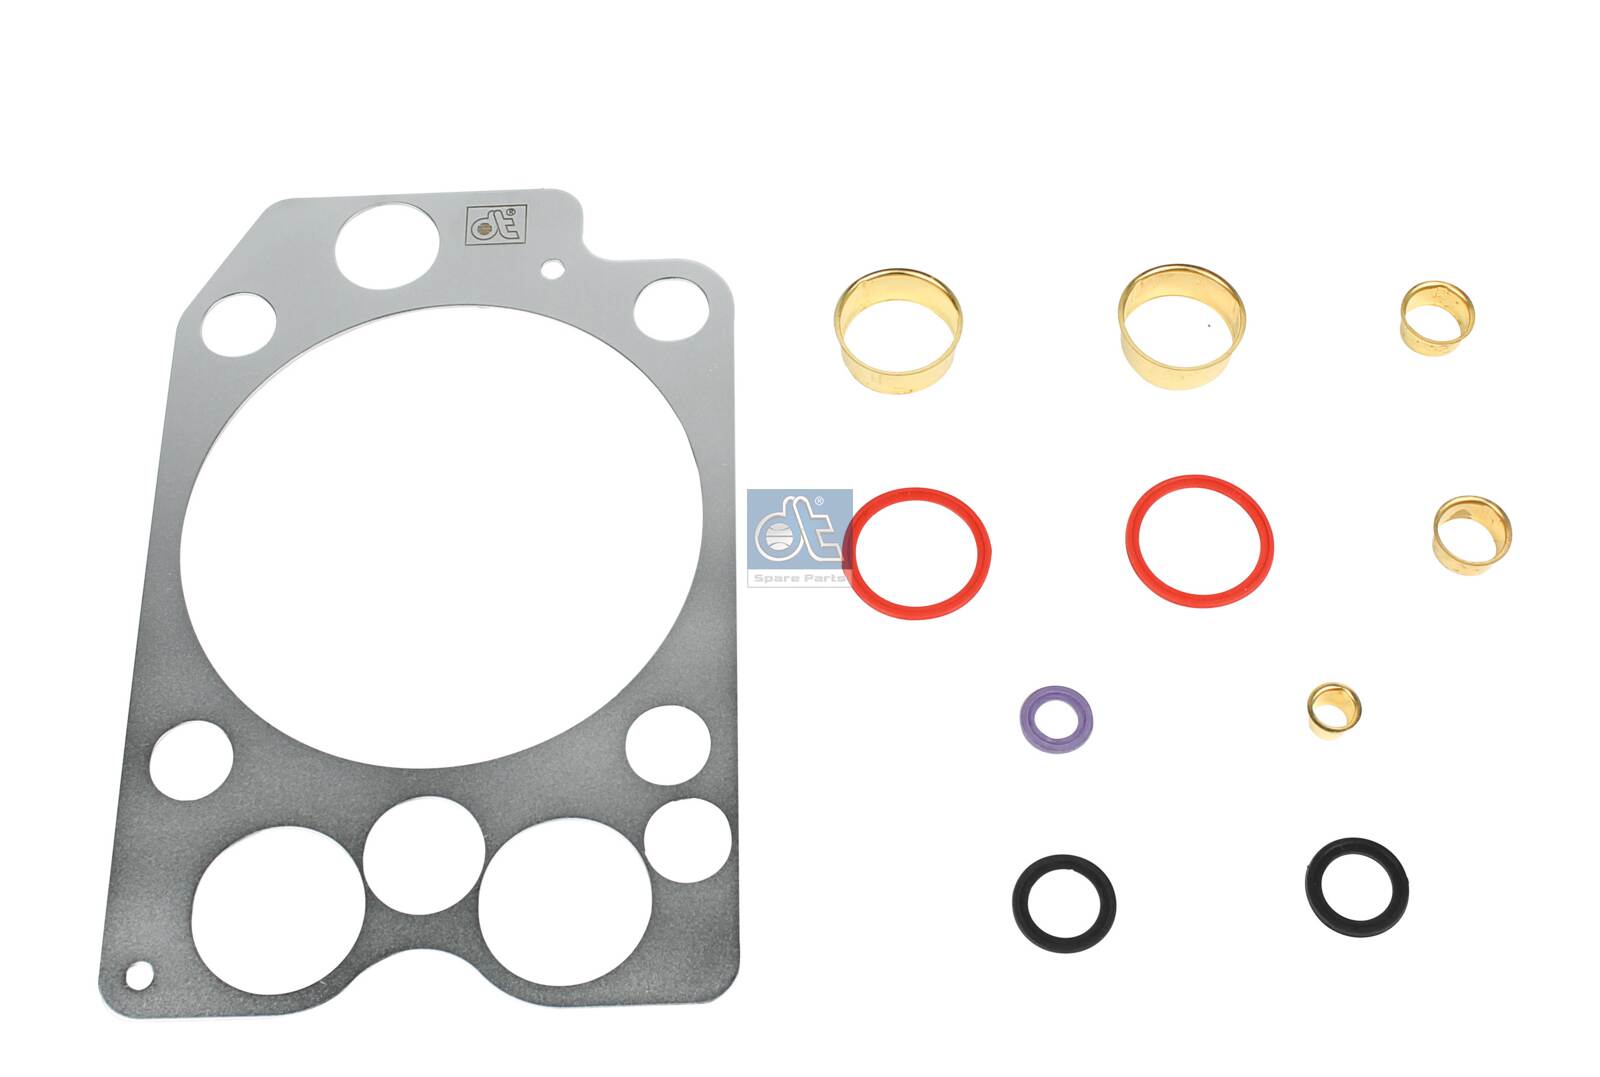 2.31026, Gasket Kit, cylinder head, DT Spare Parts, 270789, 275742, 01-27190-02, 02-27190-03, 030.716, 03.10.025, 07304, 10805.35, 22103, 55004300, 570.842, 74847, T8001090, 01-27190-03, 02.03.01.215450, 10805.35LMA, 1242567, 571.220, T9000190, 01-27190-04, 2.31026DPH/36801, 330078, 38940, 571.237, T9000200, 002743, 01-27190-06, 2.31026DPH/37415, 35000.67, 571.246